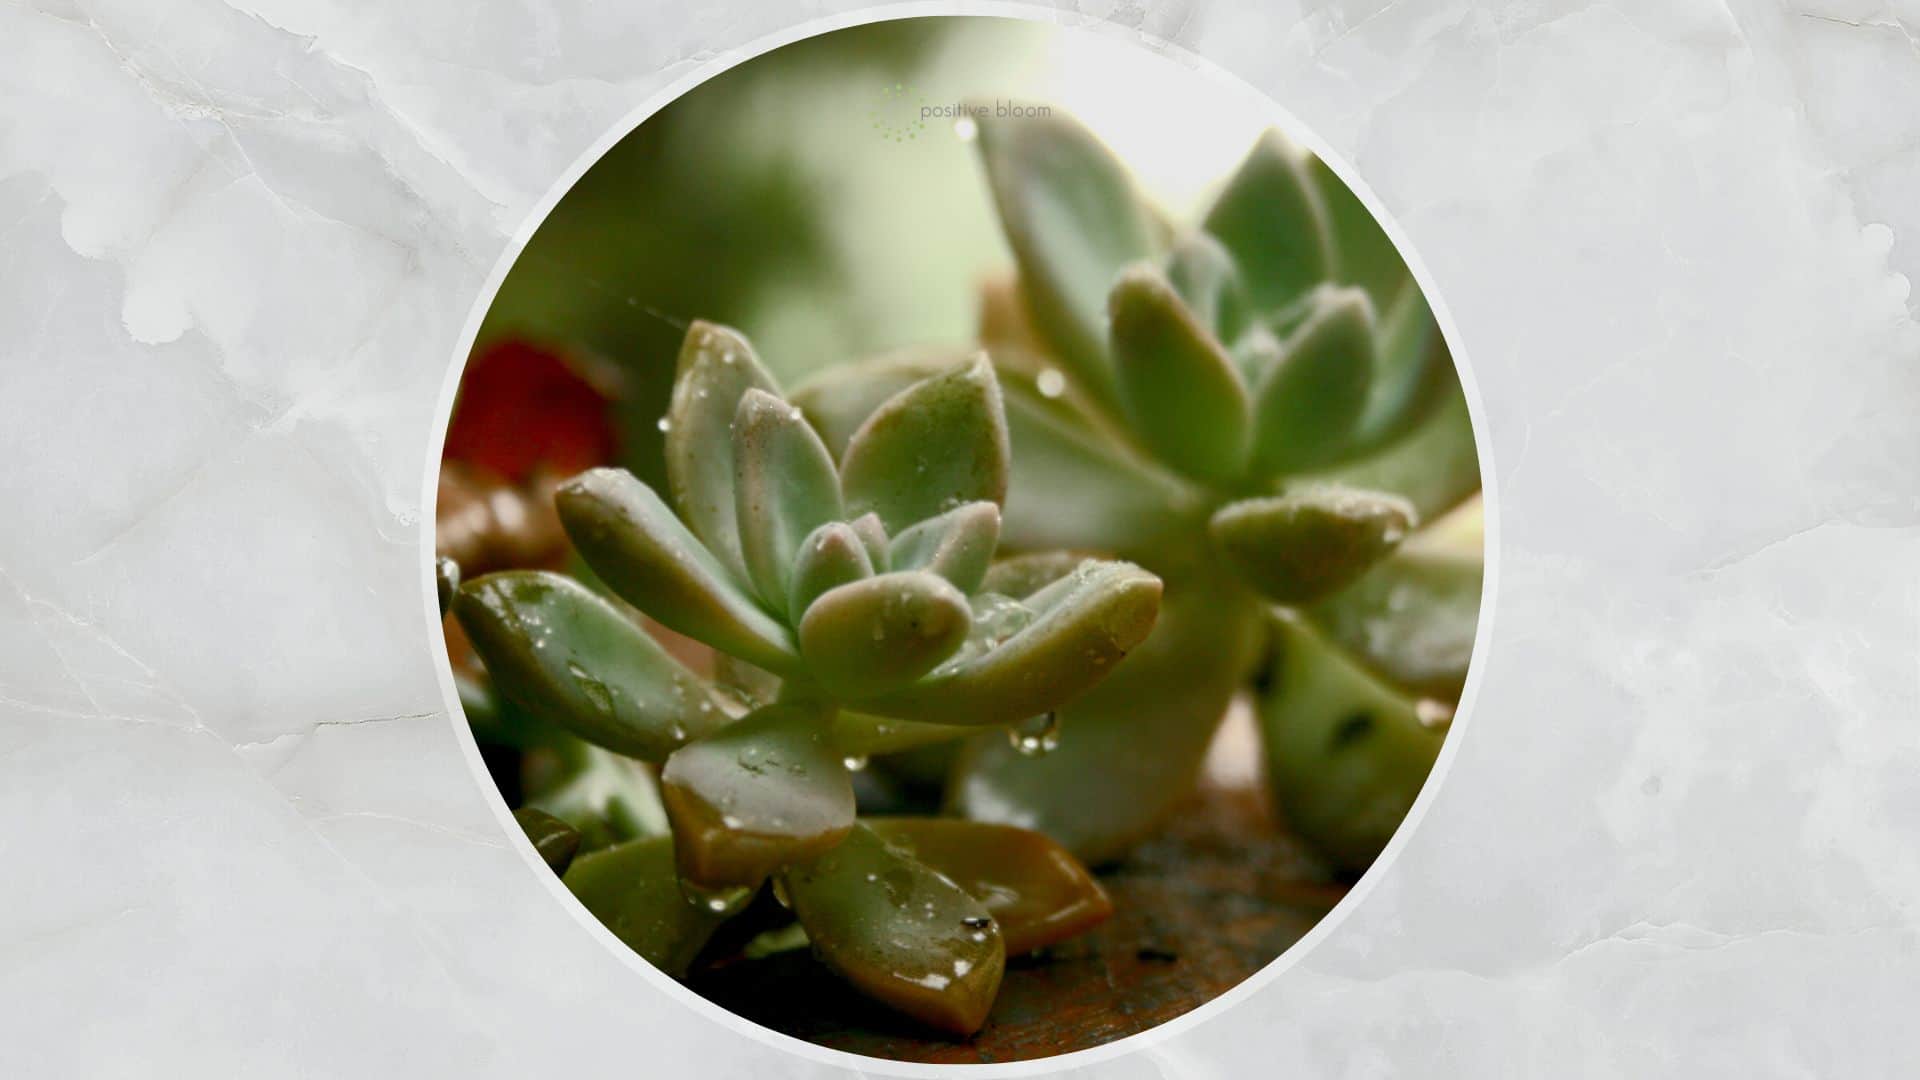 How To Grow The Campfire Succulent + Solve Its Common Issues